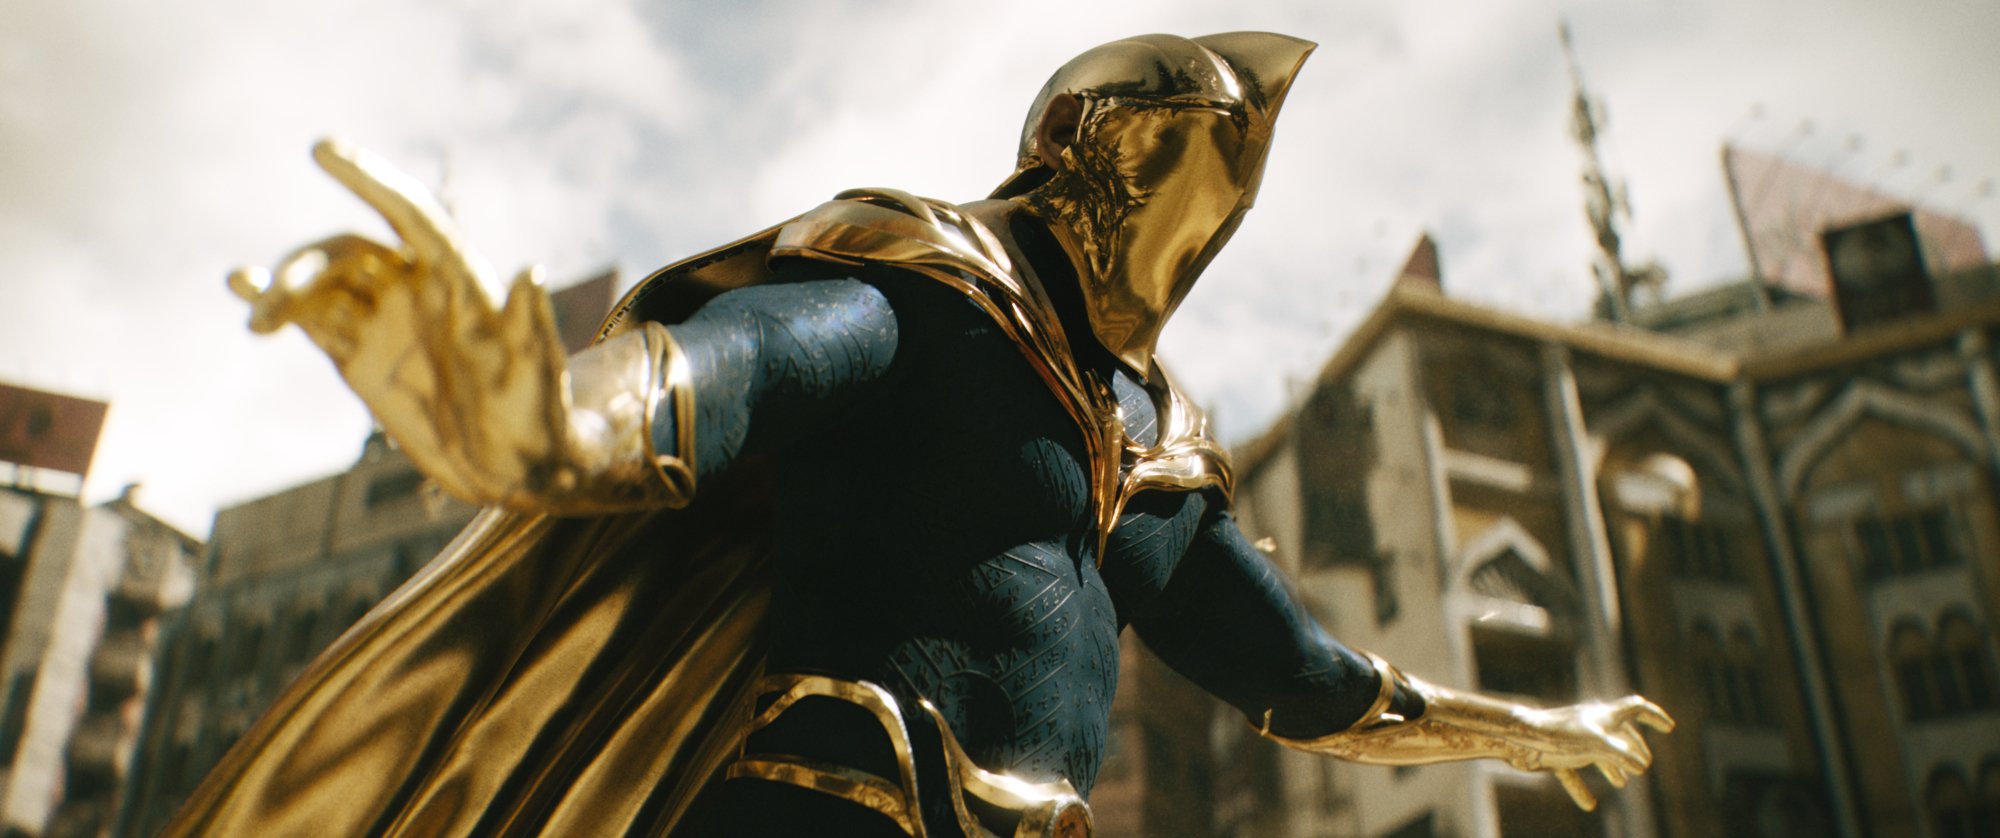 'Black Adam' Pierce Brosnan as Dr. Fate wearing a gold and black costume, holding his hand out and wearing a golden helmet.